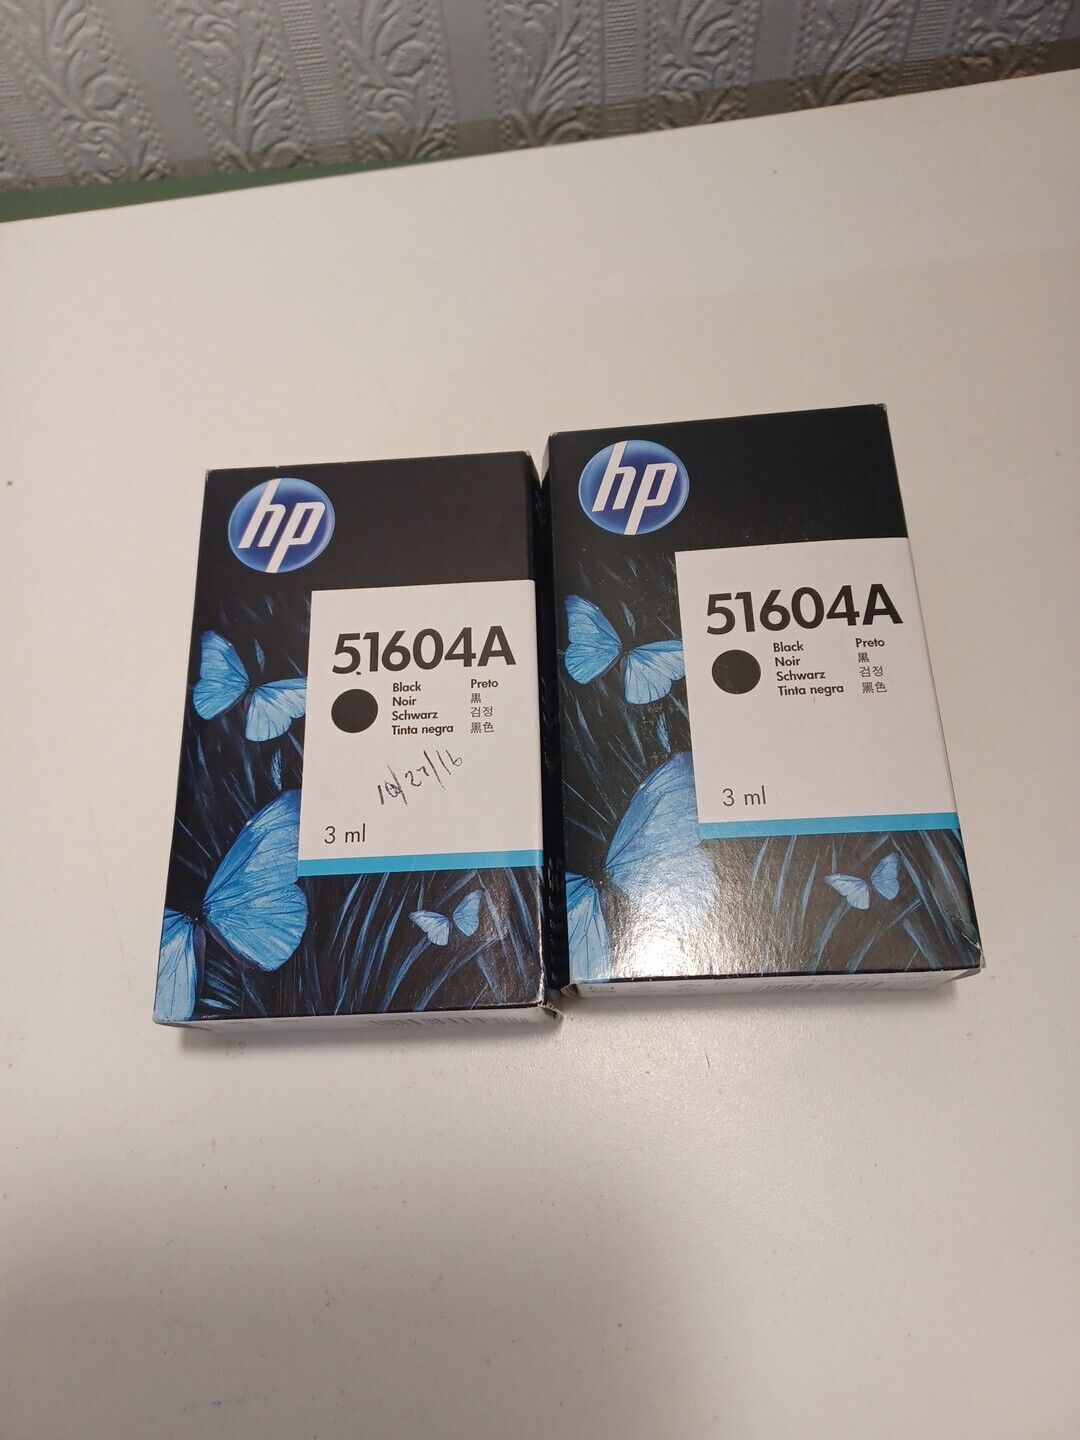 Hp 51604A Black Printer Ink Expire 2018 Lot Of 2 Sealed 